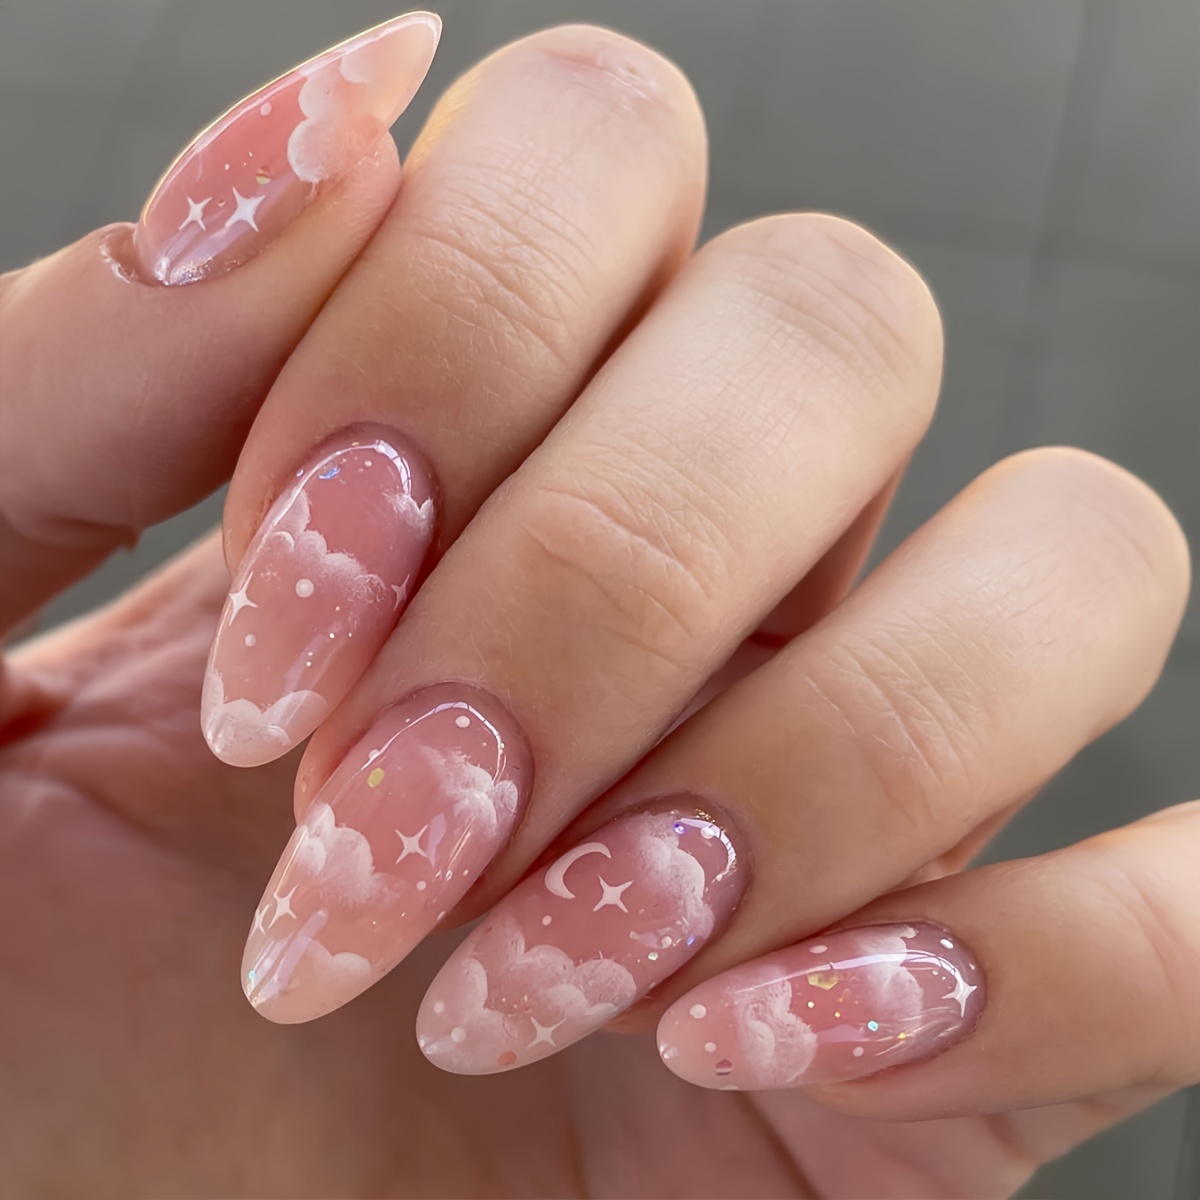 

24pcs Glossy Pinkish Press On Nails With Clouds, Starlight Design, Sweet Medium Almond Fake Nails Full Cover Fake Nails For Women Girls Daily Wear